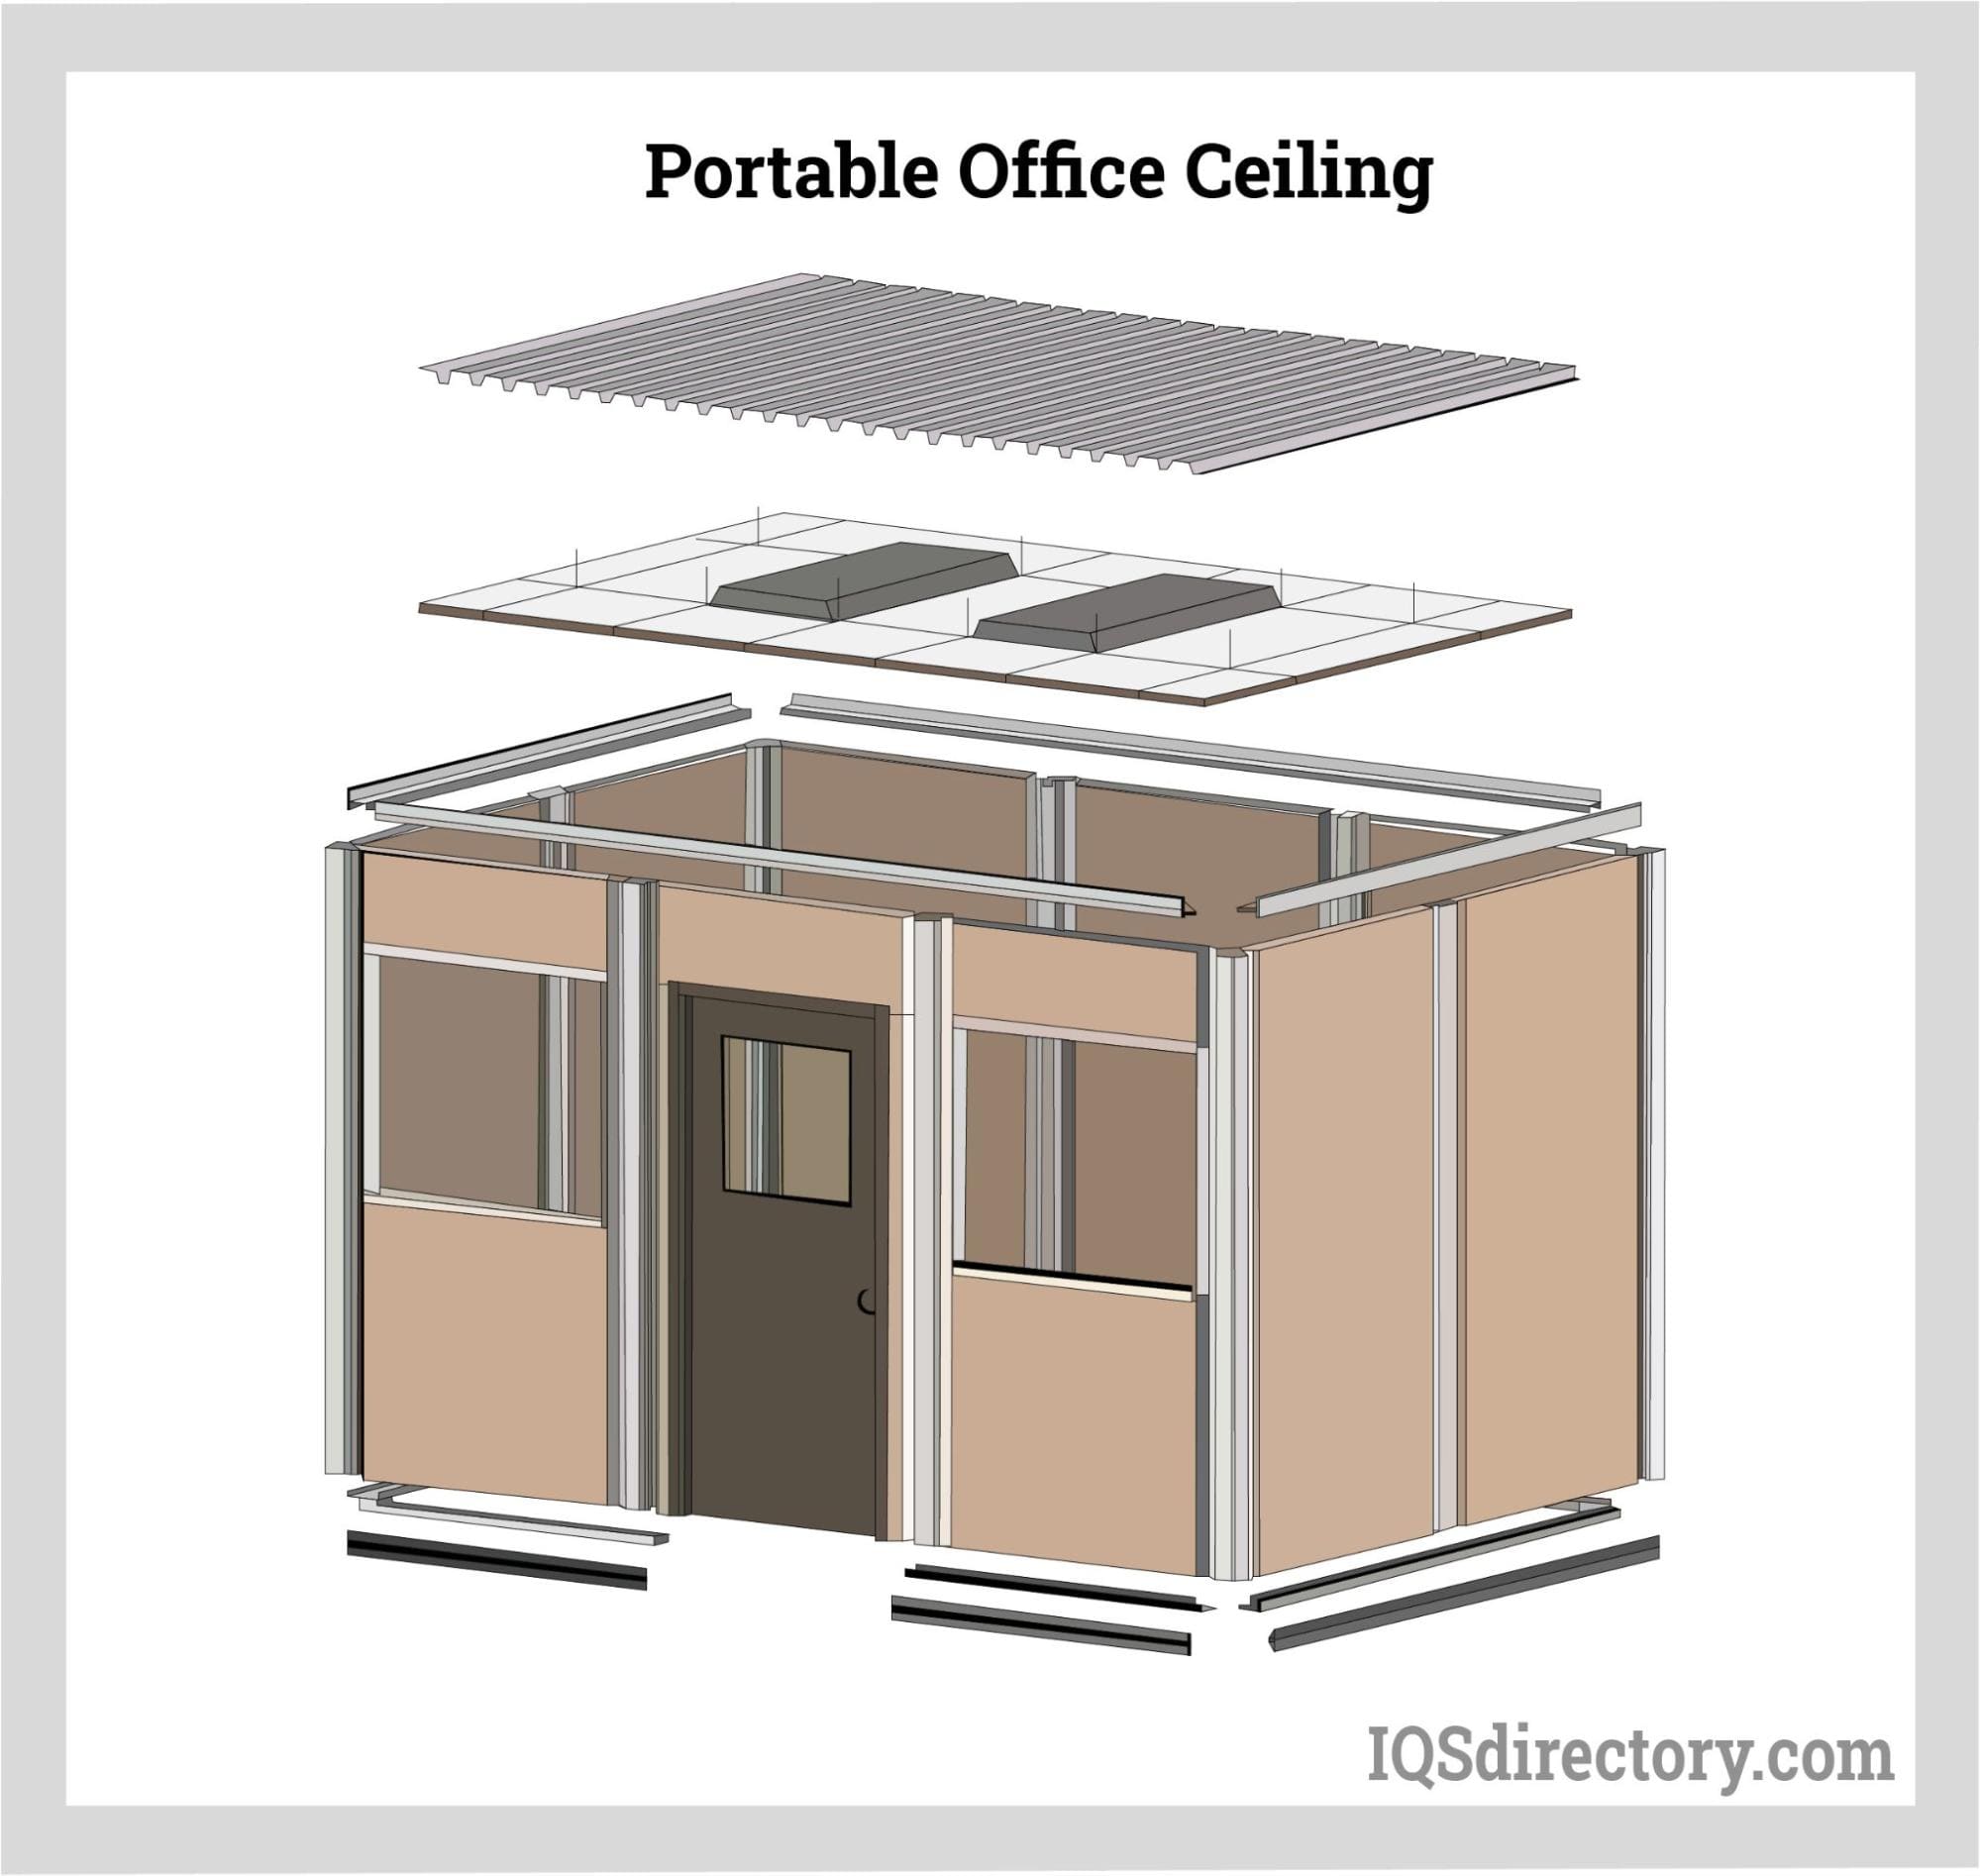 Portable Office Ceiling